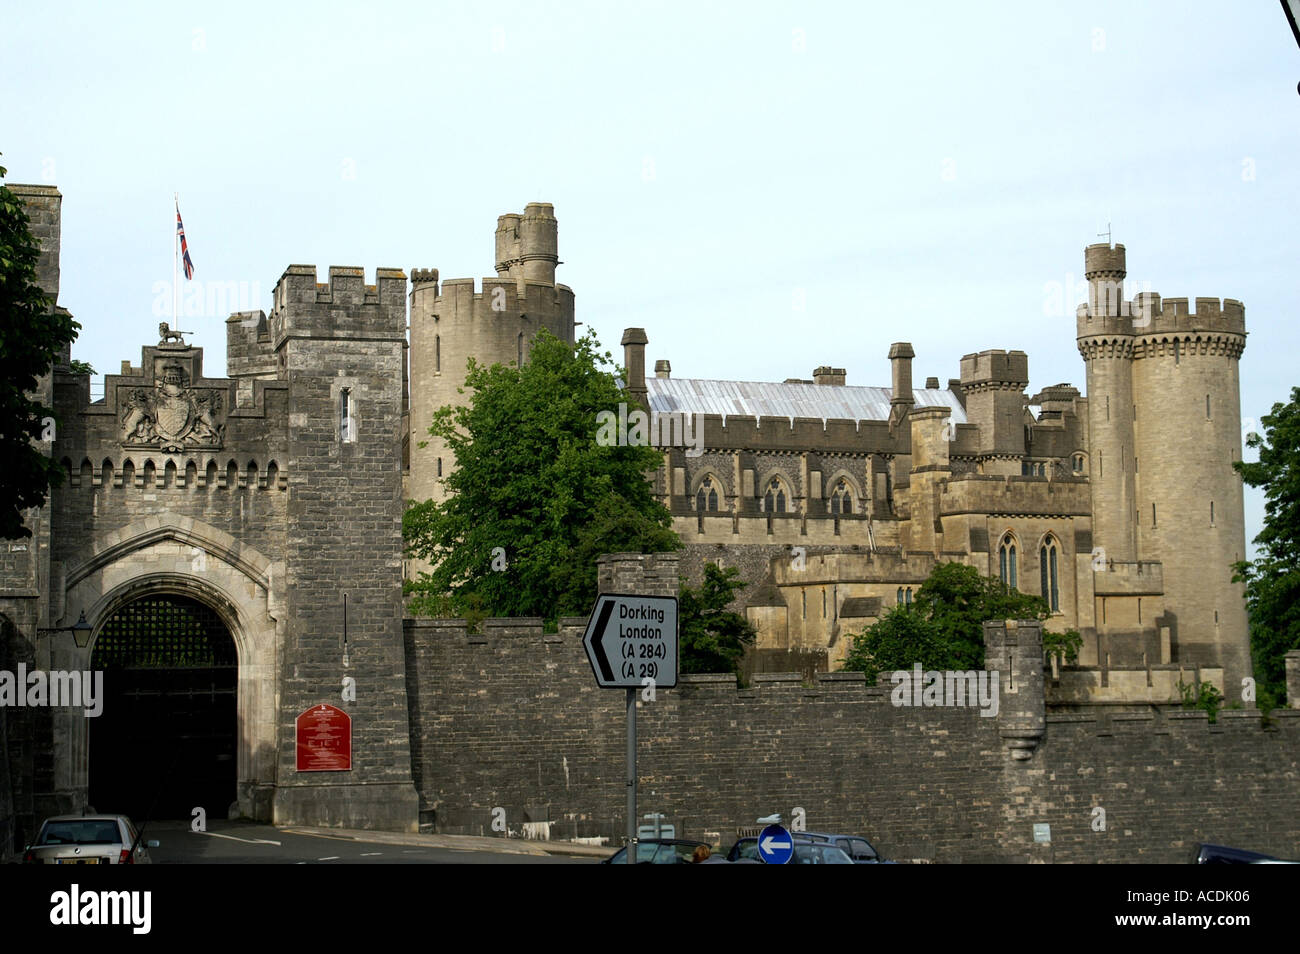 Arundel castle High Street lodge entrance Arundel South Downs West Sussex England United Kingdom UK Great Britain GB Europe Stock Photo